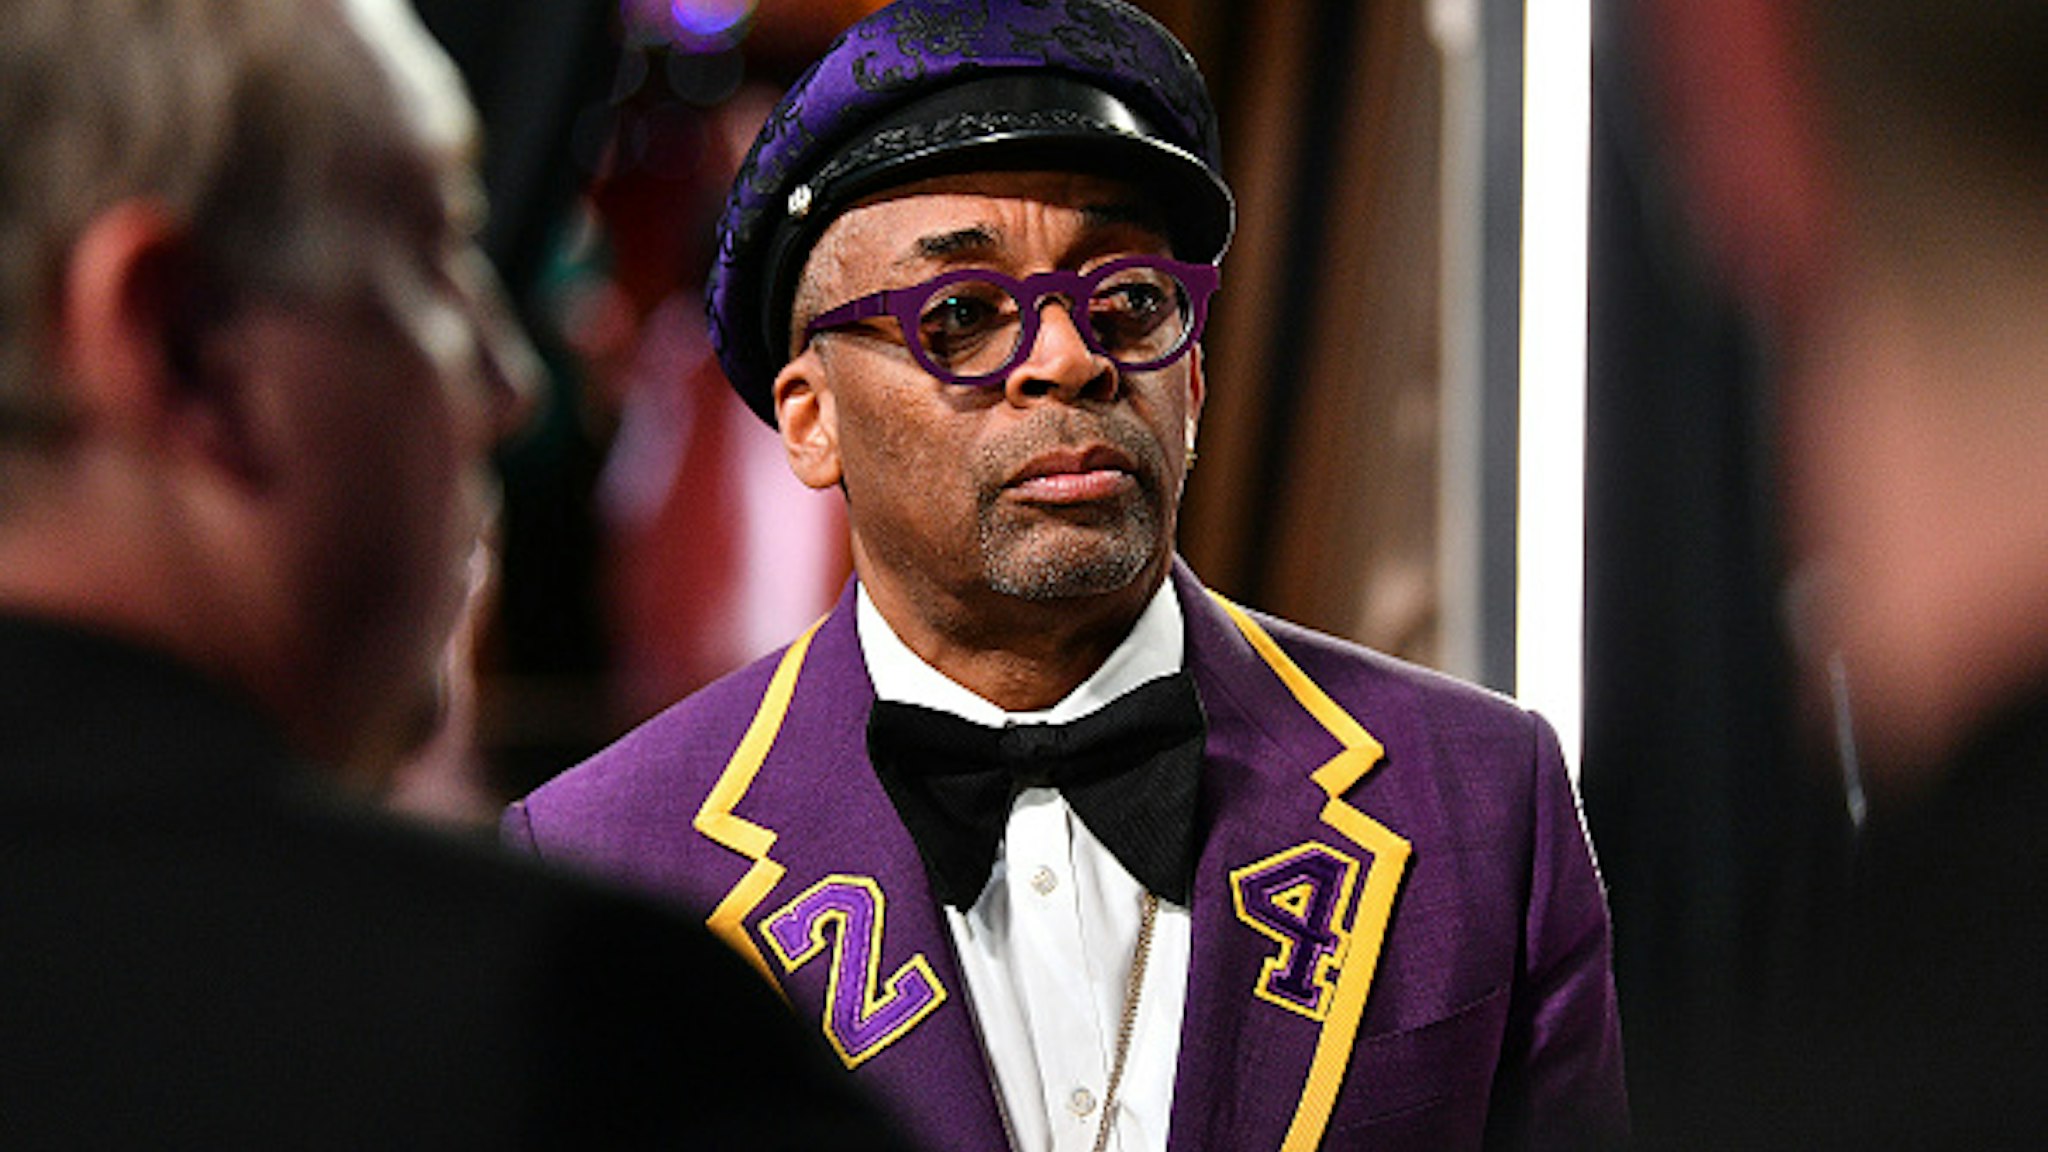 HOLLYWOOD, CALIFORNIA - FEBRUARY 09: In this handout photo provided by A.M.P.A.S. Spike Lee stands backstage during the 92nd Annual Academy Awards at the Dolby Theatre on February 09, 2020 in Hollywood, California.